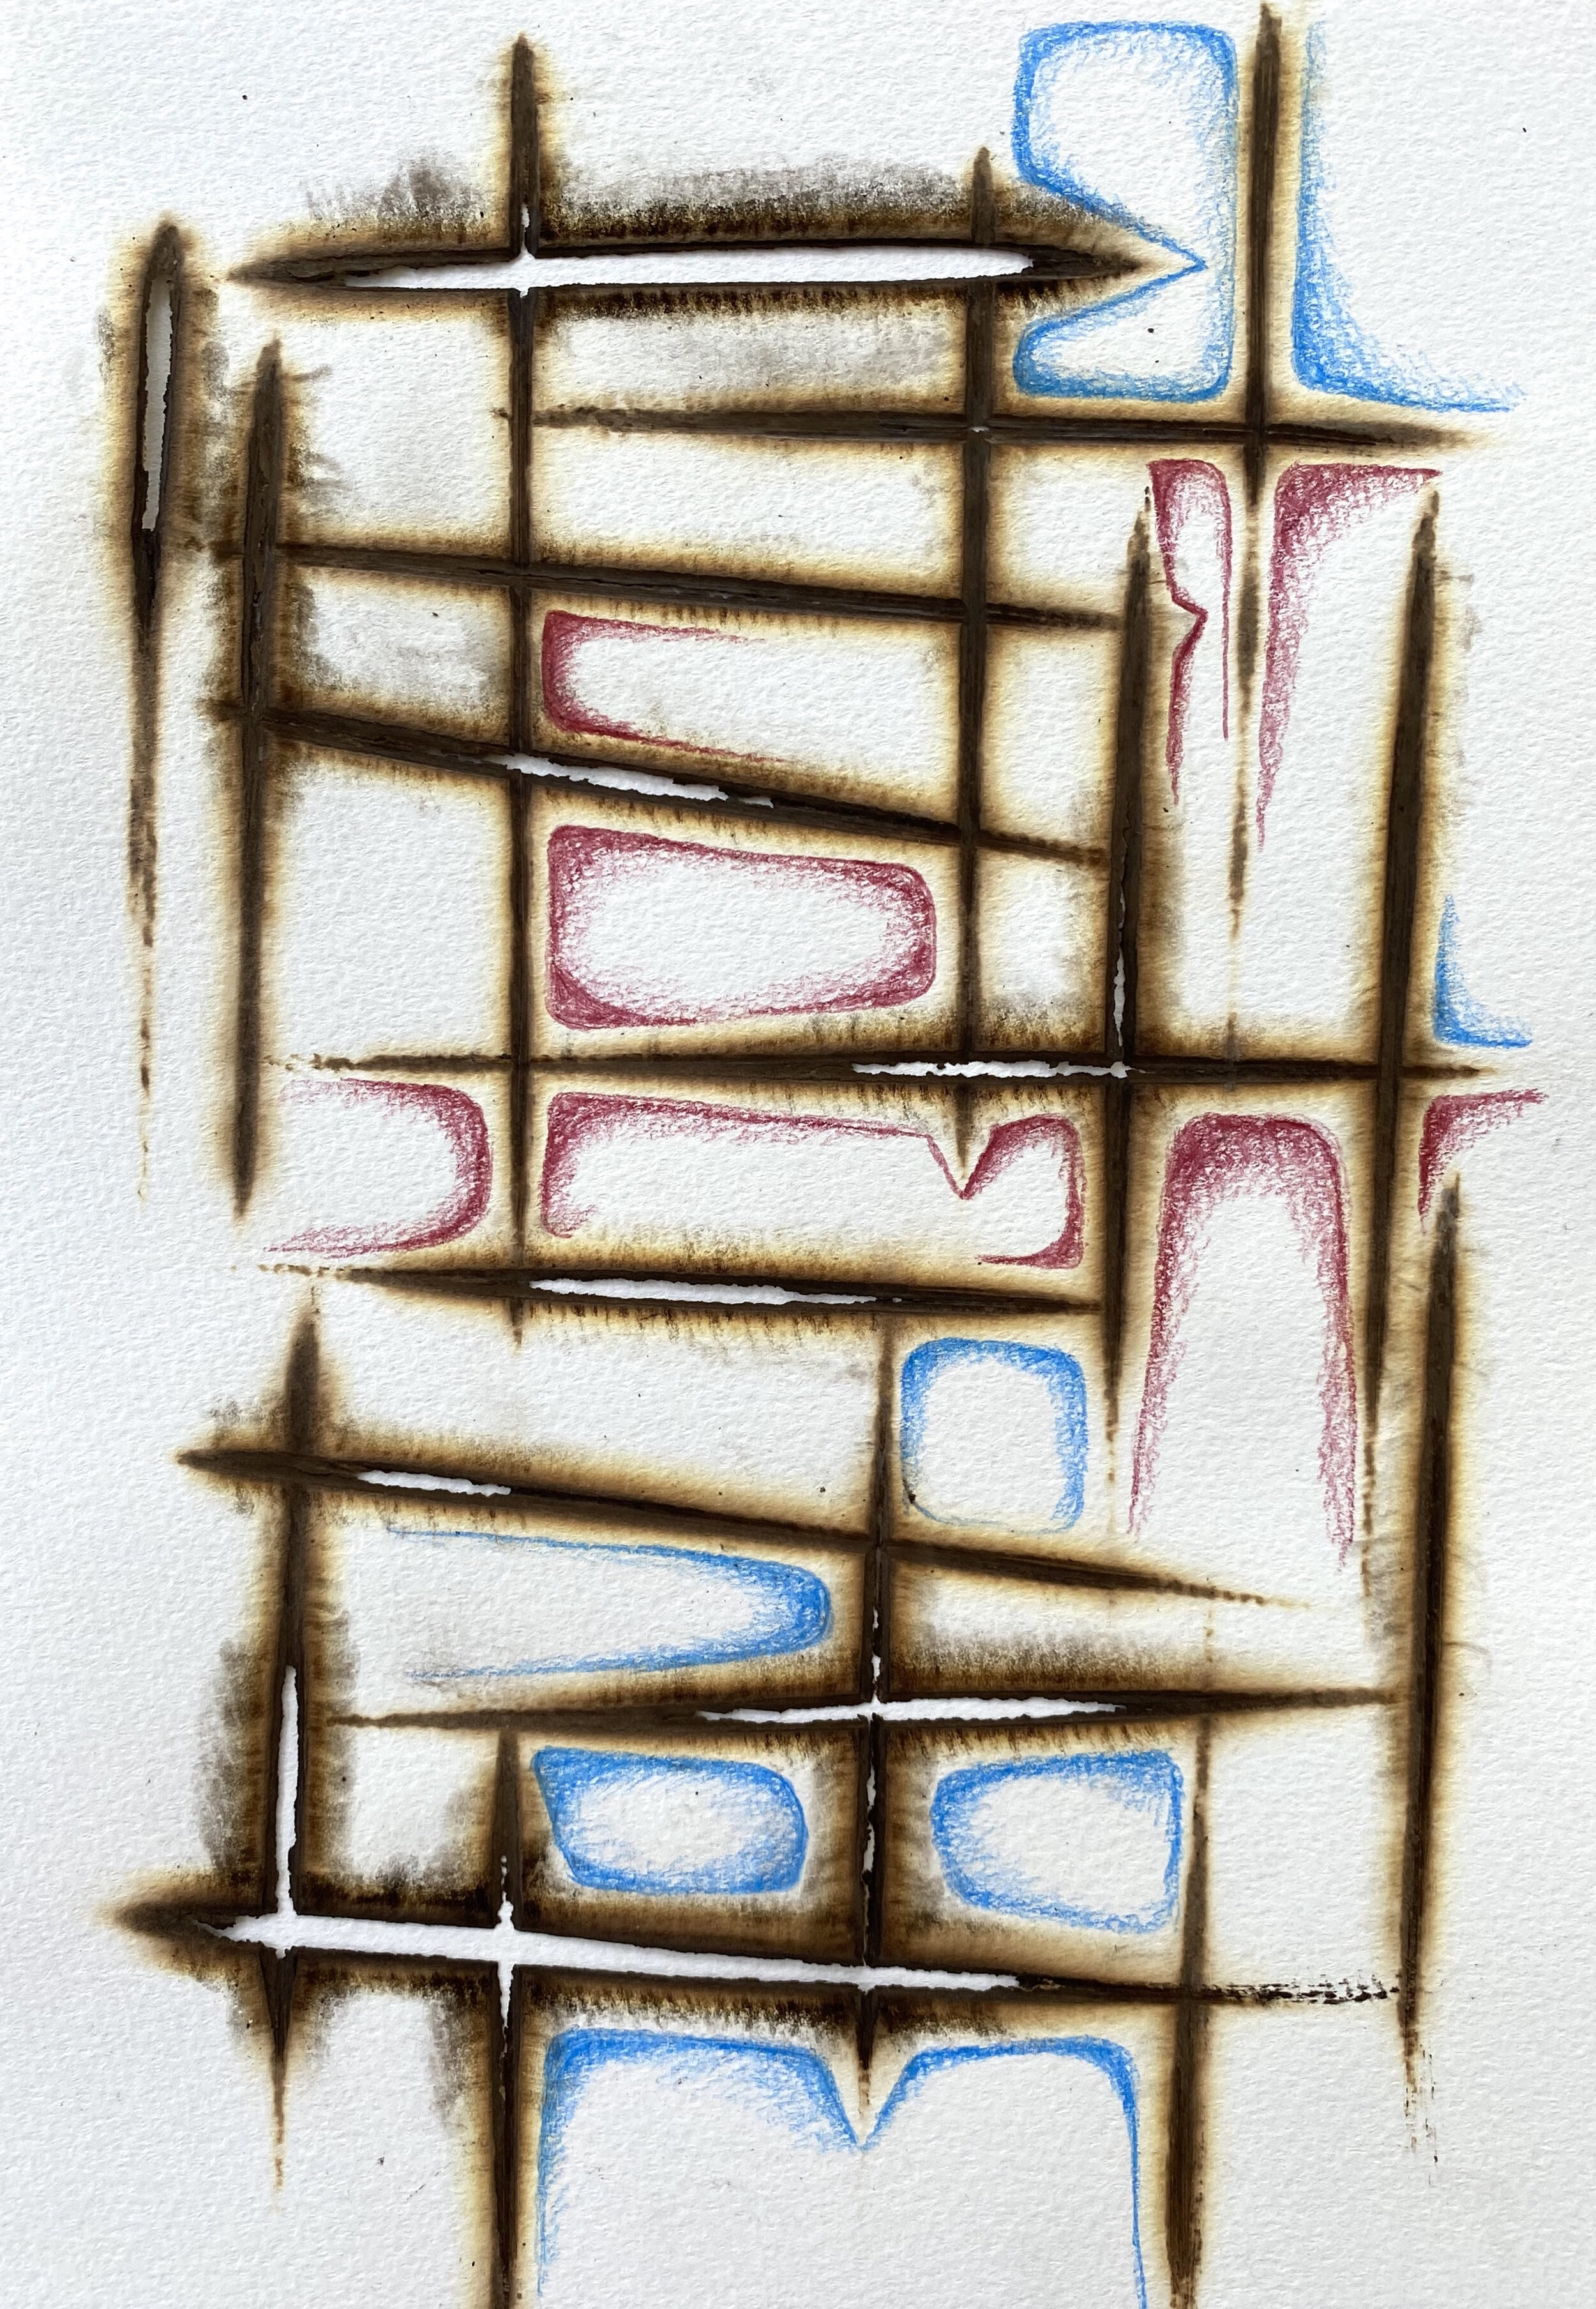  Kathleen Kucka,  Shelter Drawing #15 , 2020 Burns and colored pencil on paper 9 x 6 1/2 inches 